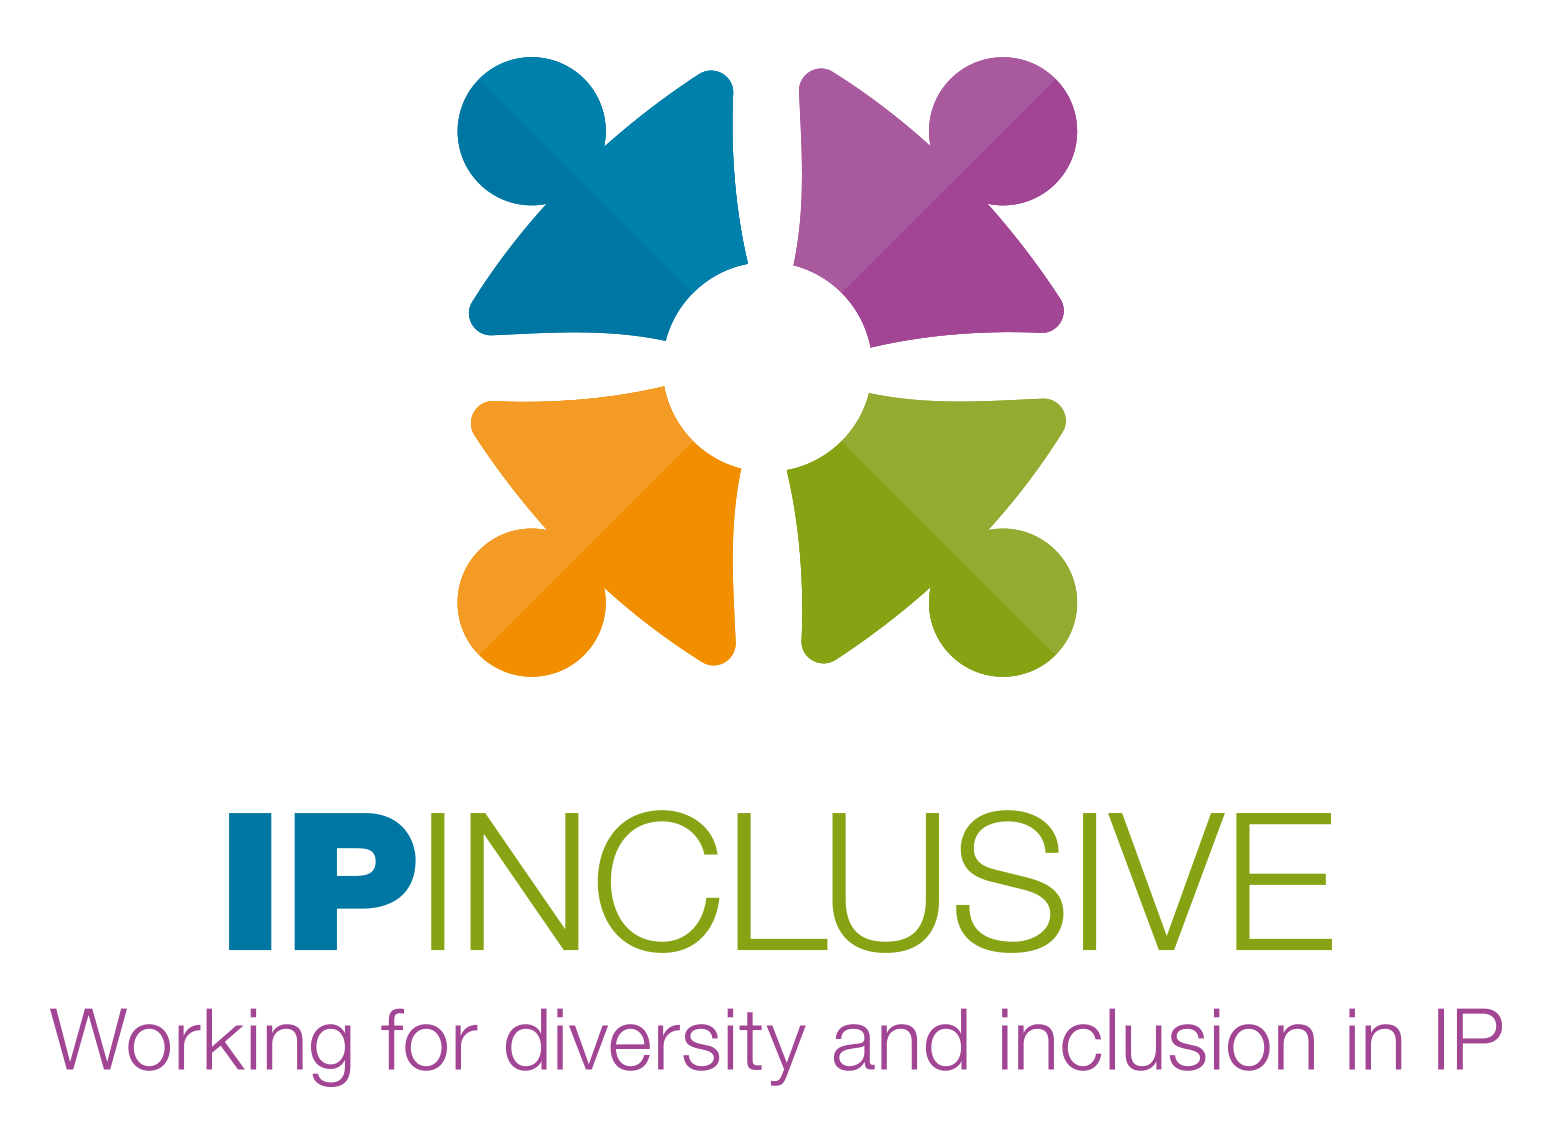 IP Inclusive [logo] - Working for diversity and inclusion in IP